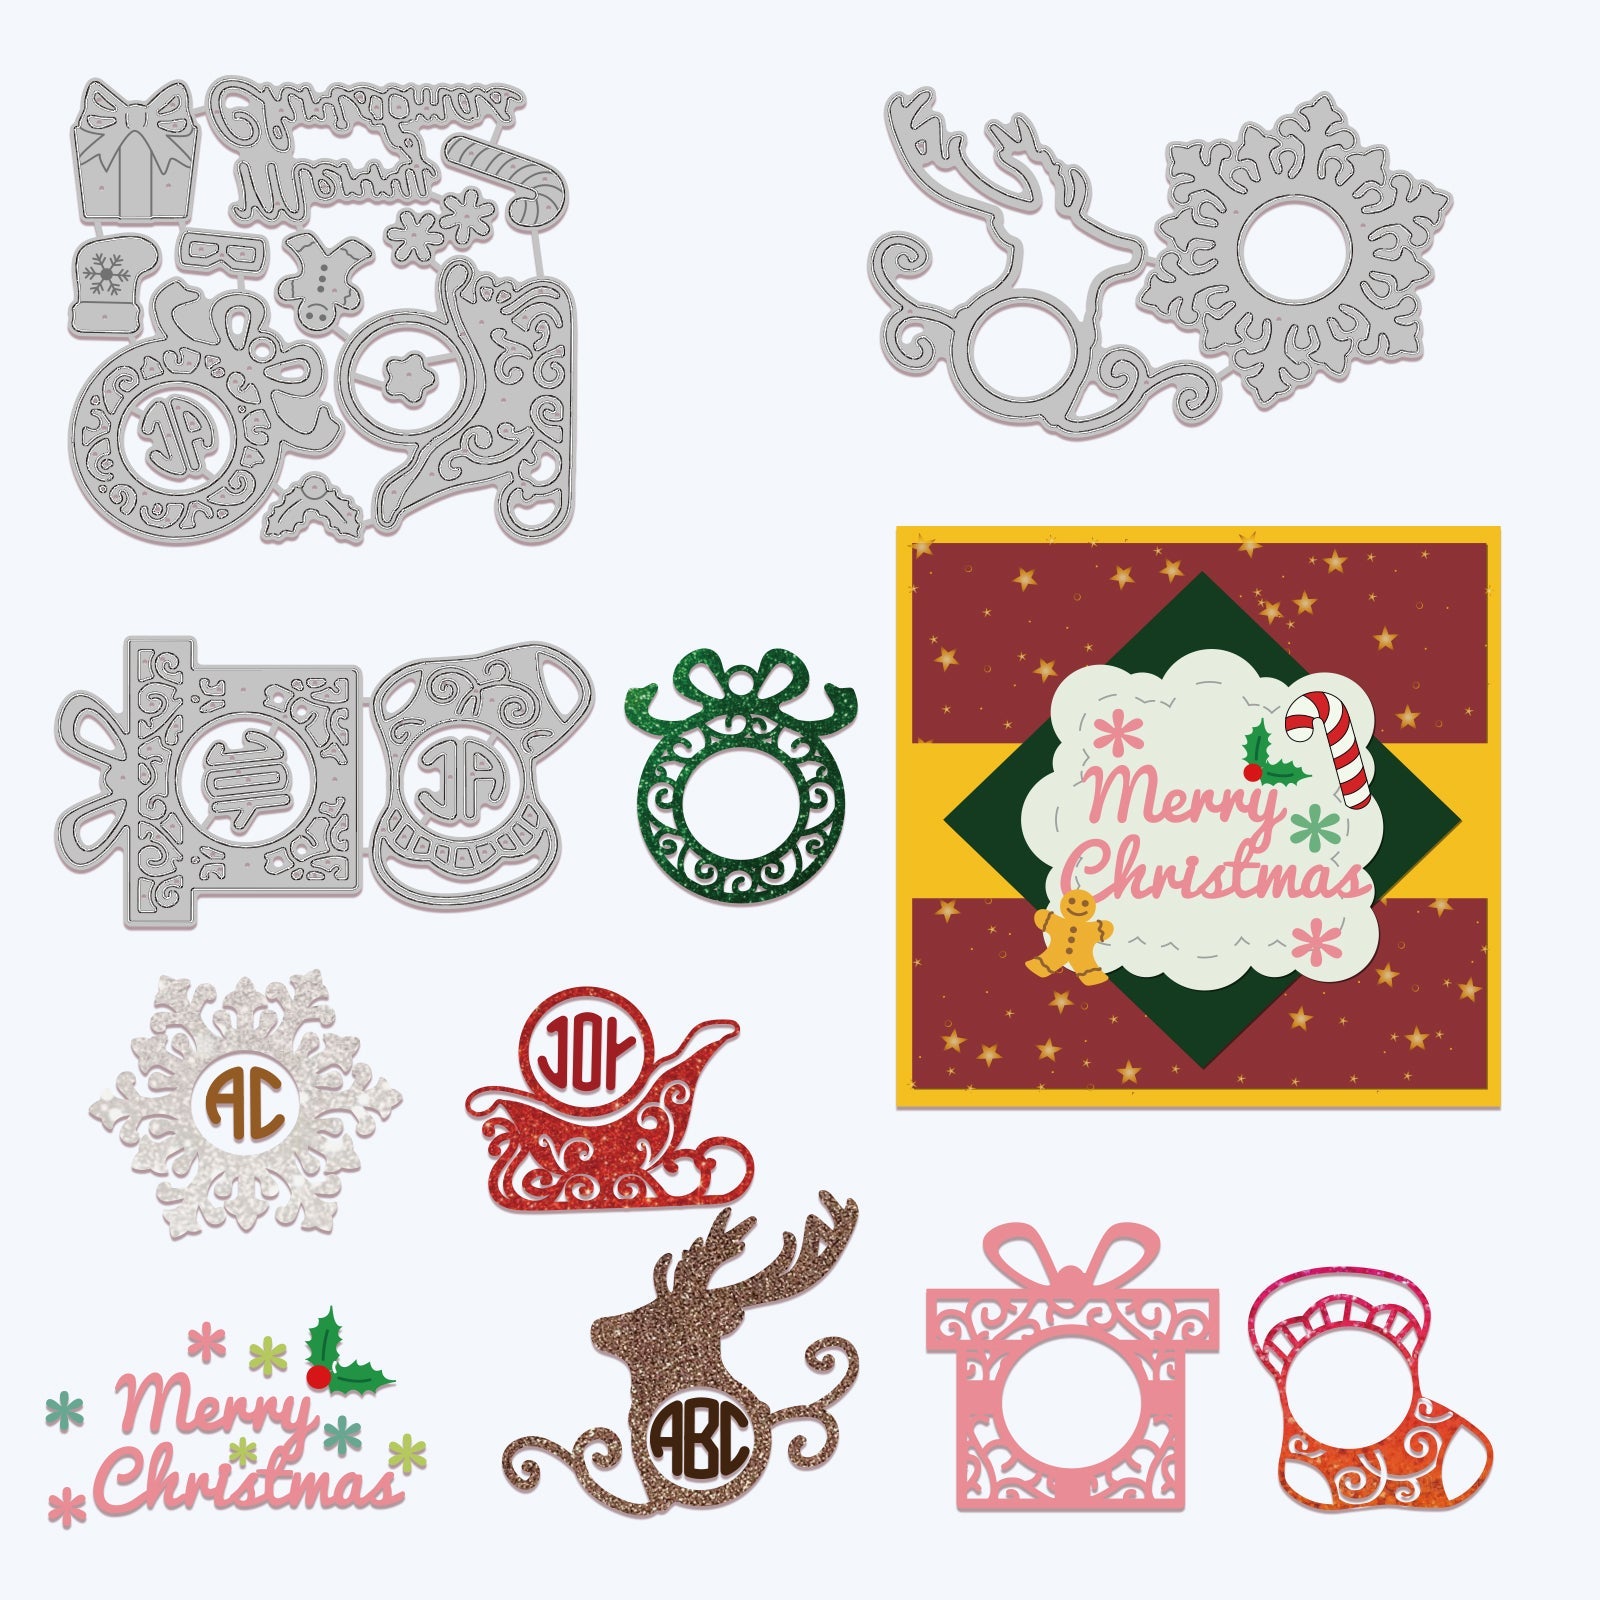 CRASPIRE Letters, Christmas Stockings, Christmas Gift Boxes, Christmas Sleigh Car, Snowflakes Carbon Steel Cutting Dies Stencils, for DIY Scrapbooking/Photo Album, Decorative Embossing DIY Paper Card